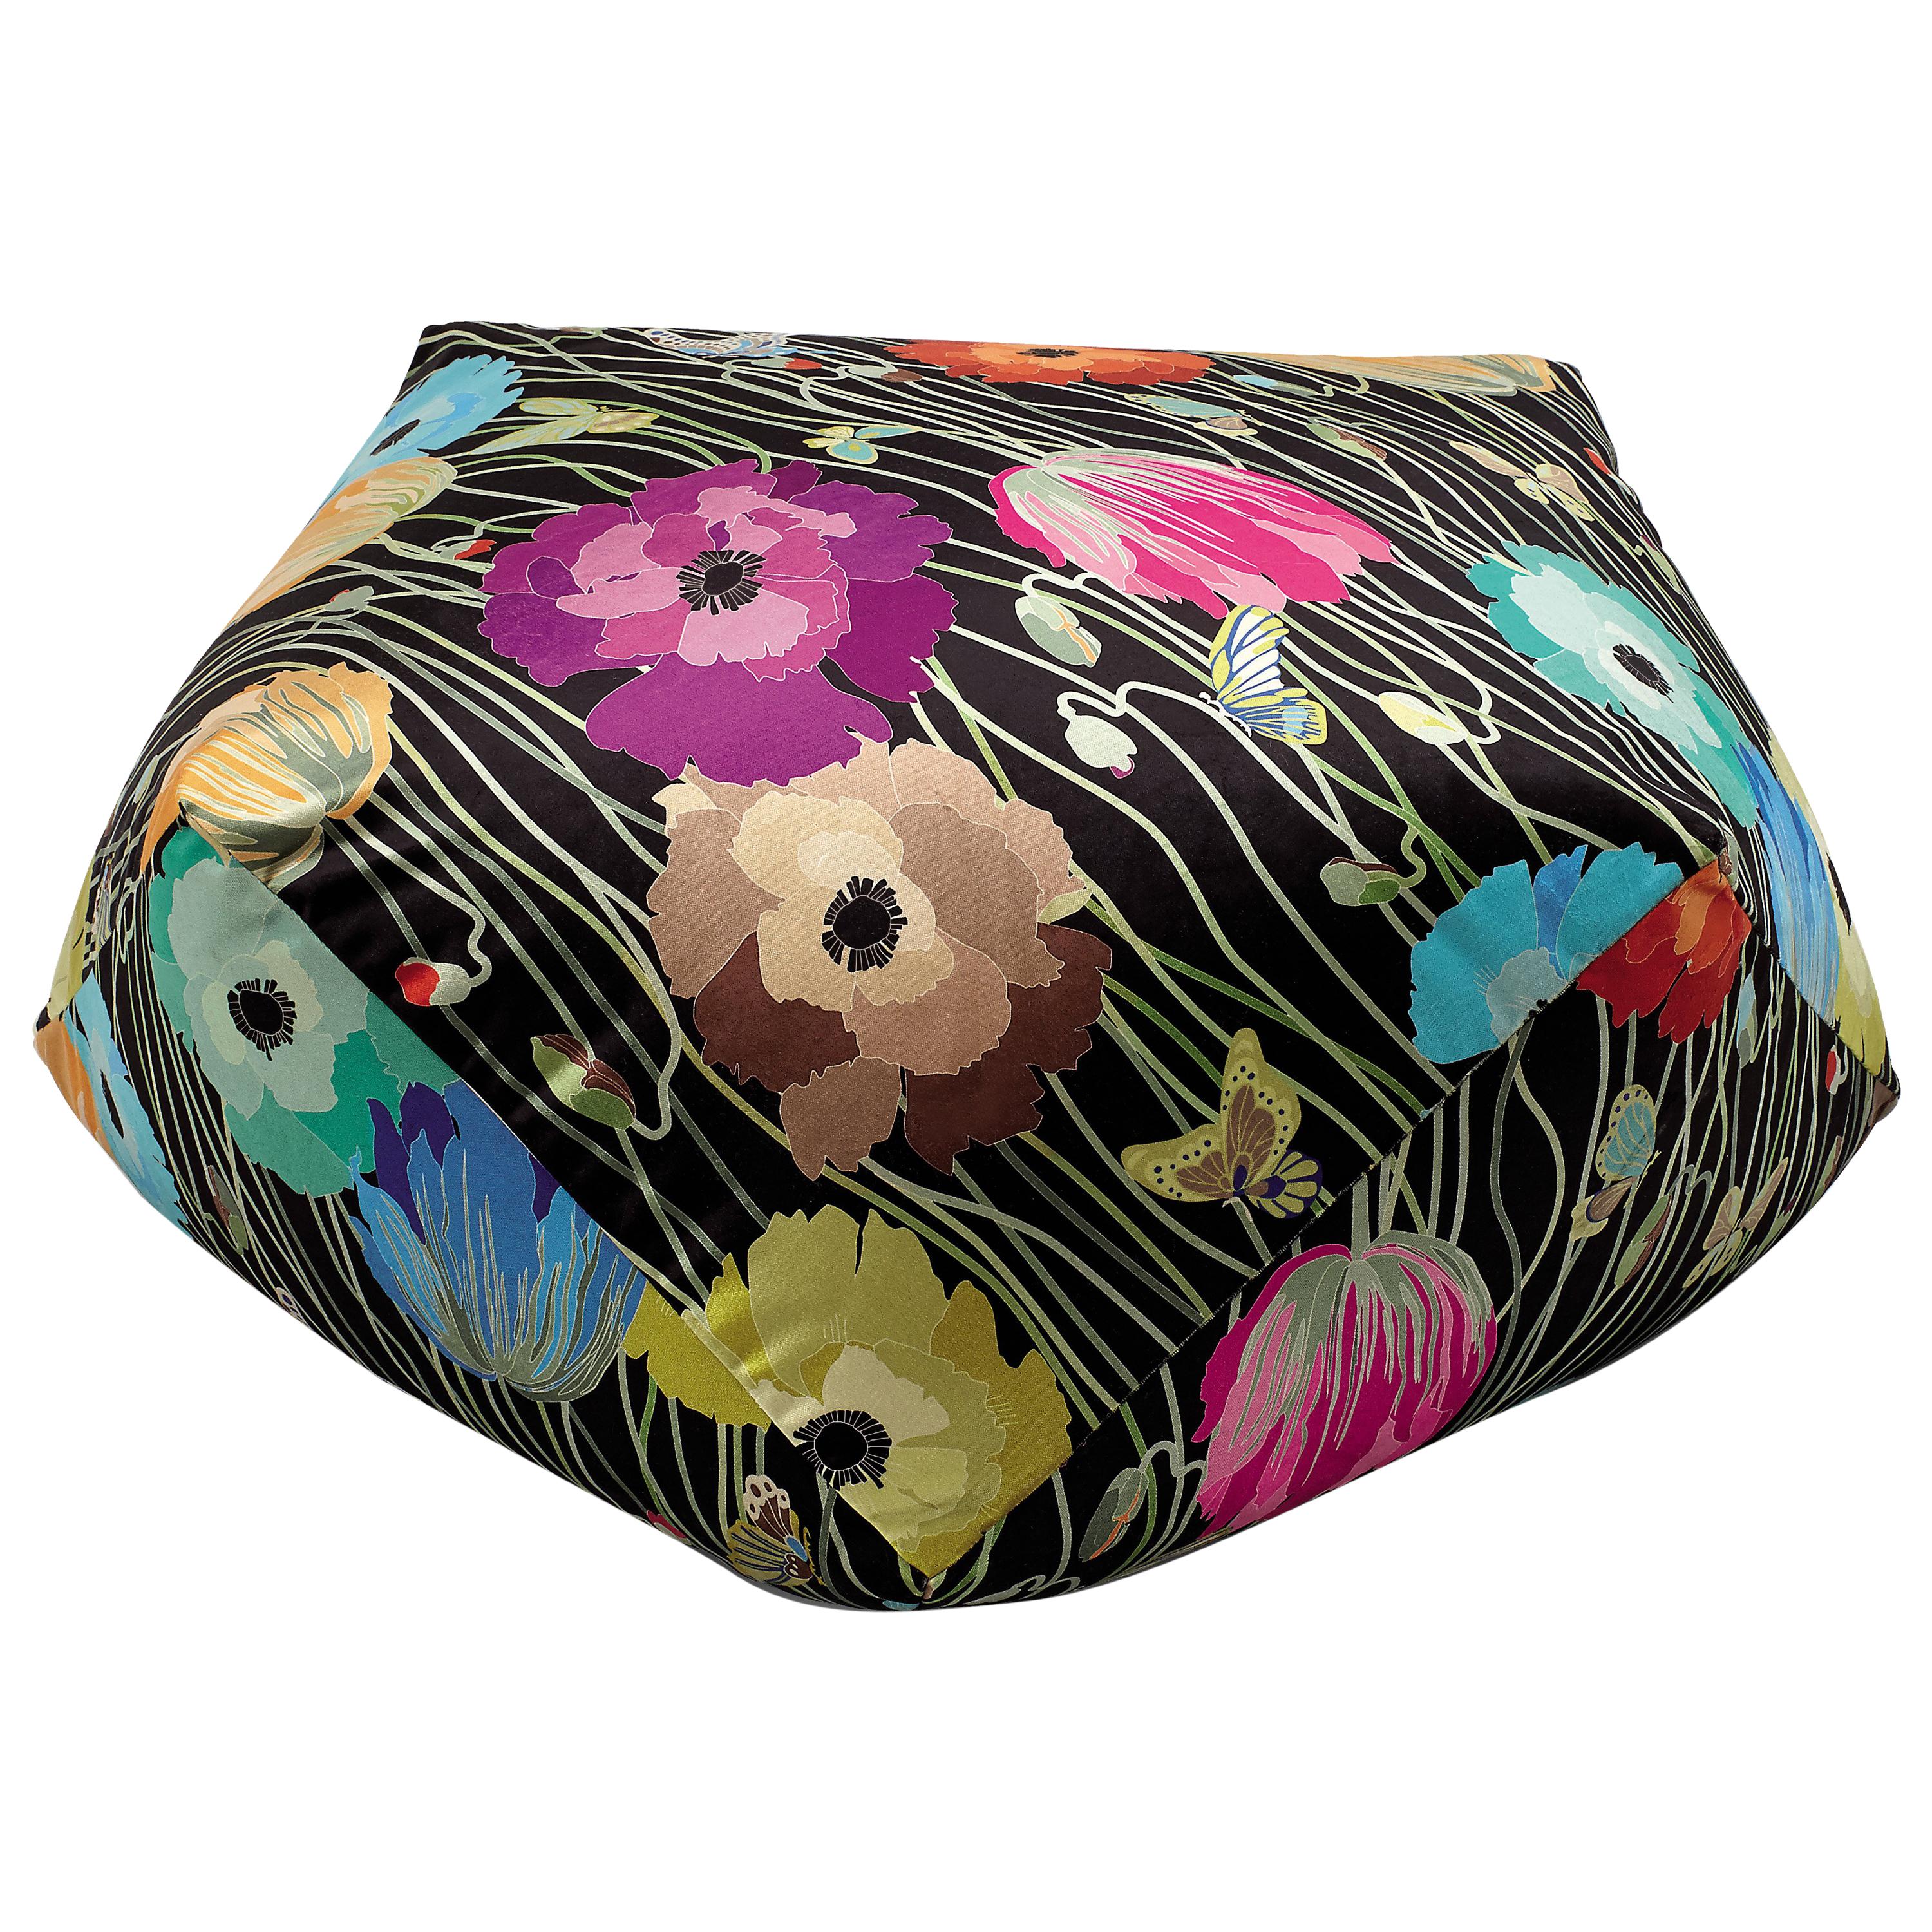 Missoni Home Vancouver Diamante Pouf in Black with Floral Pattern For Sale